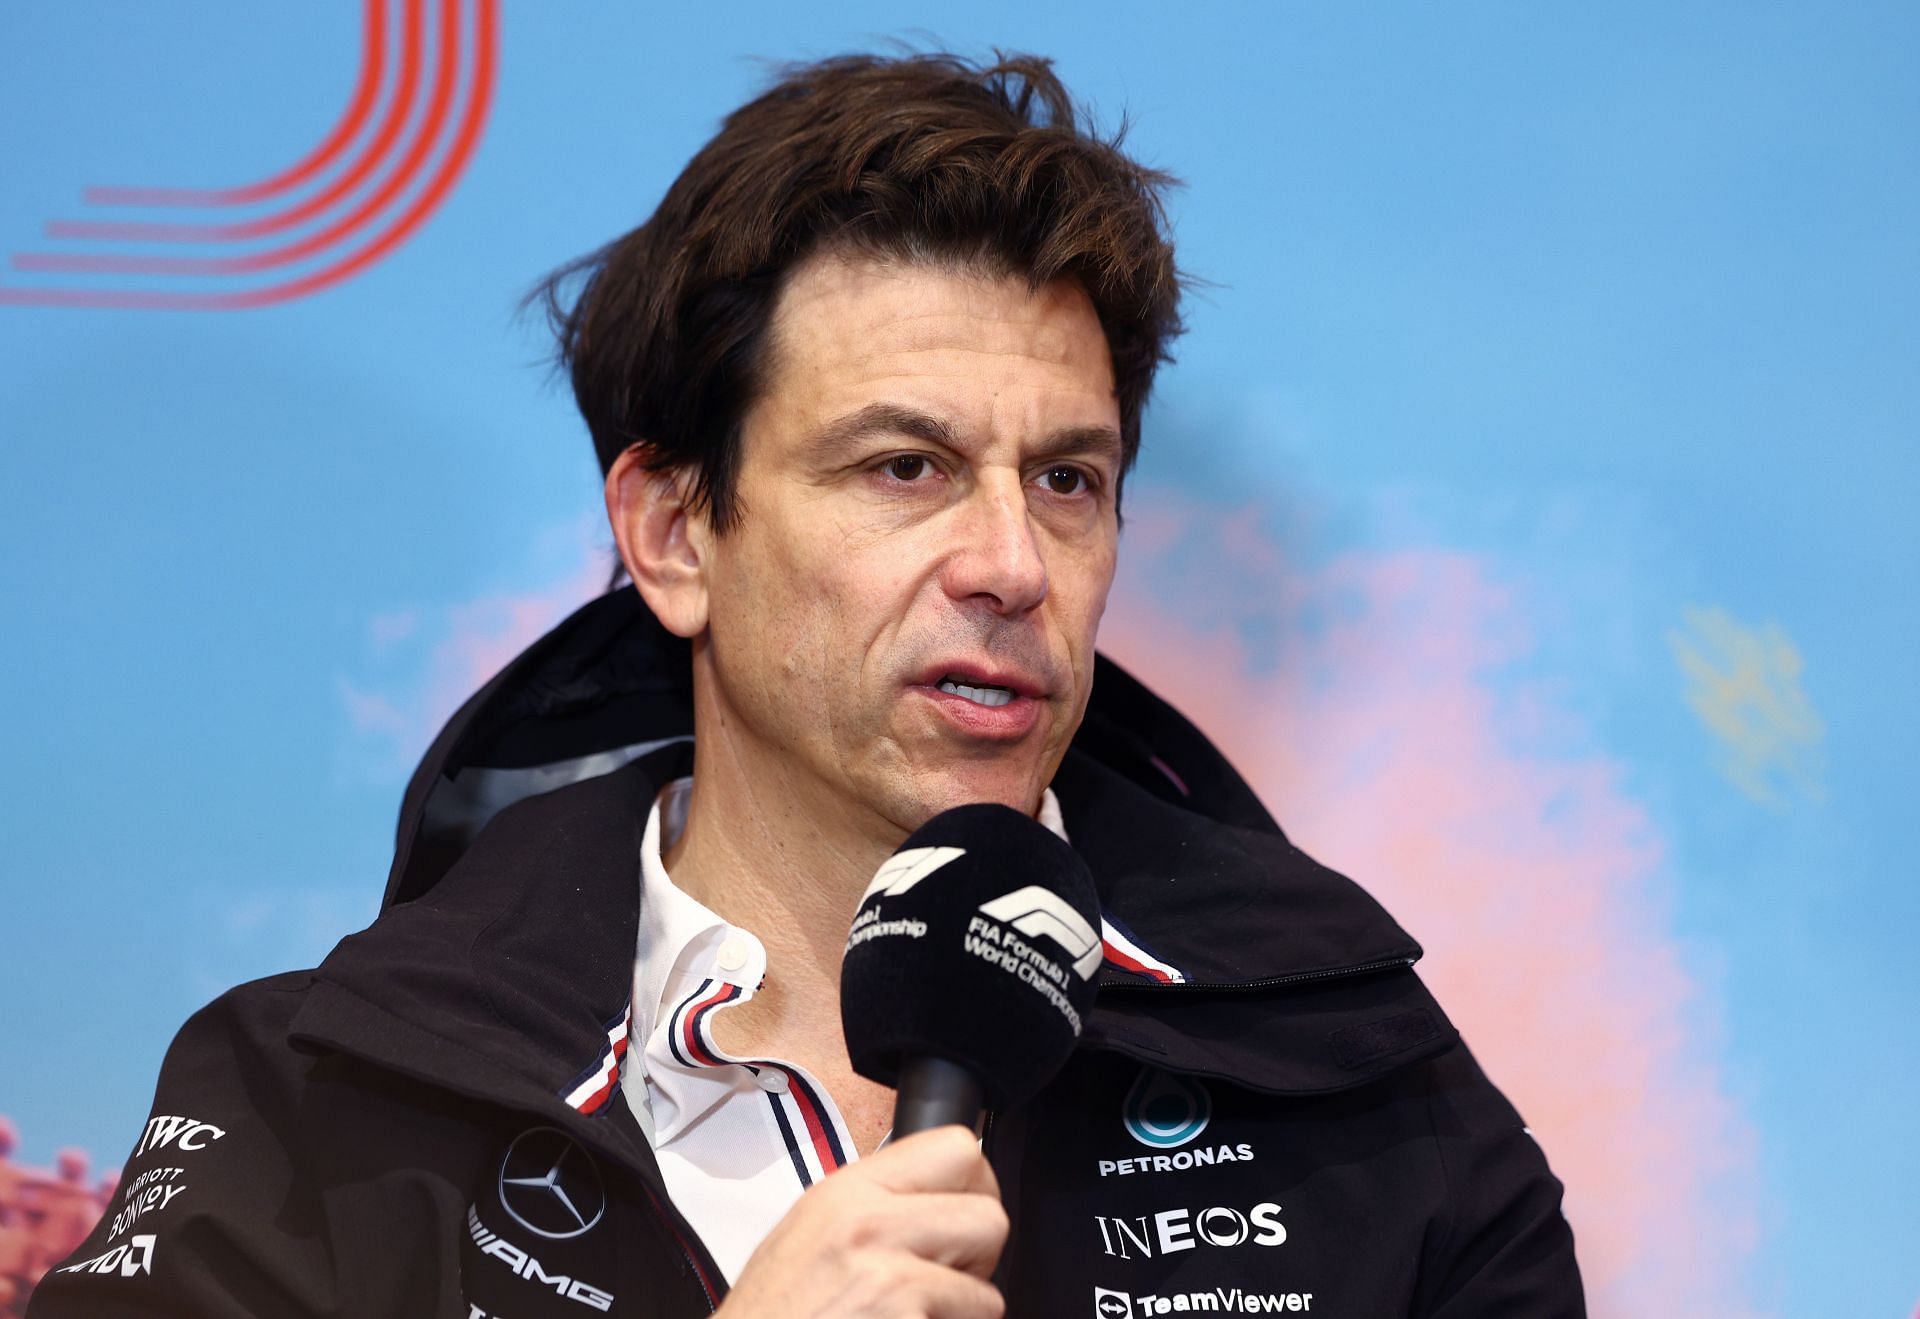 Mercedes GP Executive Director Toto Wolff talks in the Team Principals Press Conference prior to practice ahead of the F1 Grand Prix of Austria at Red Bull Ring on July 09, 2022 in Spielberg, Austria. (Photo by Clive Rose/Getty Images)